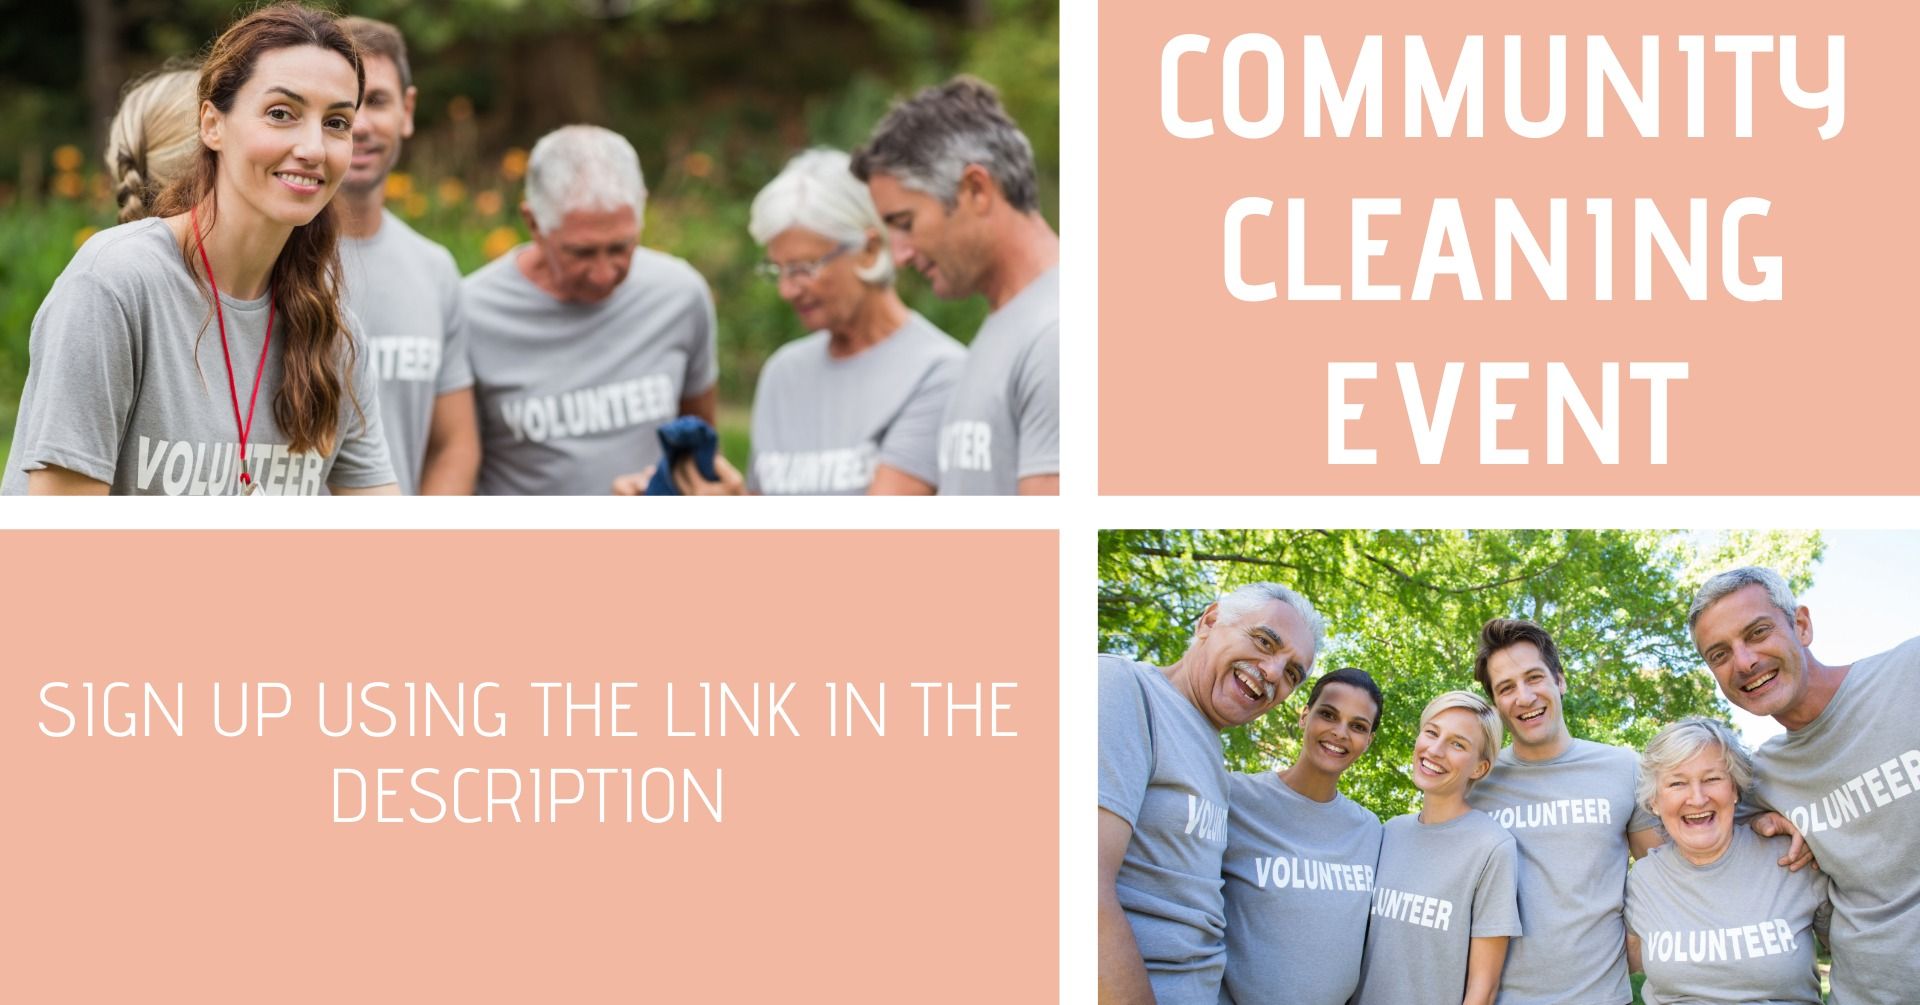 Community facebook event banner with striking imagery - Best practices for choosing photo sizes for Facebook events - Image